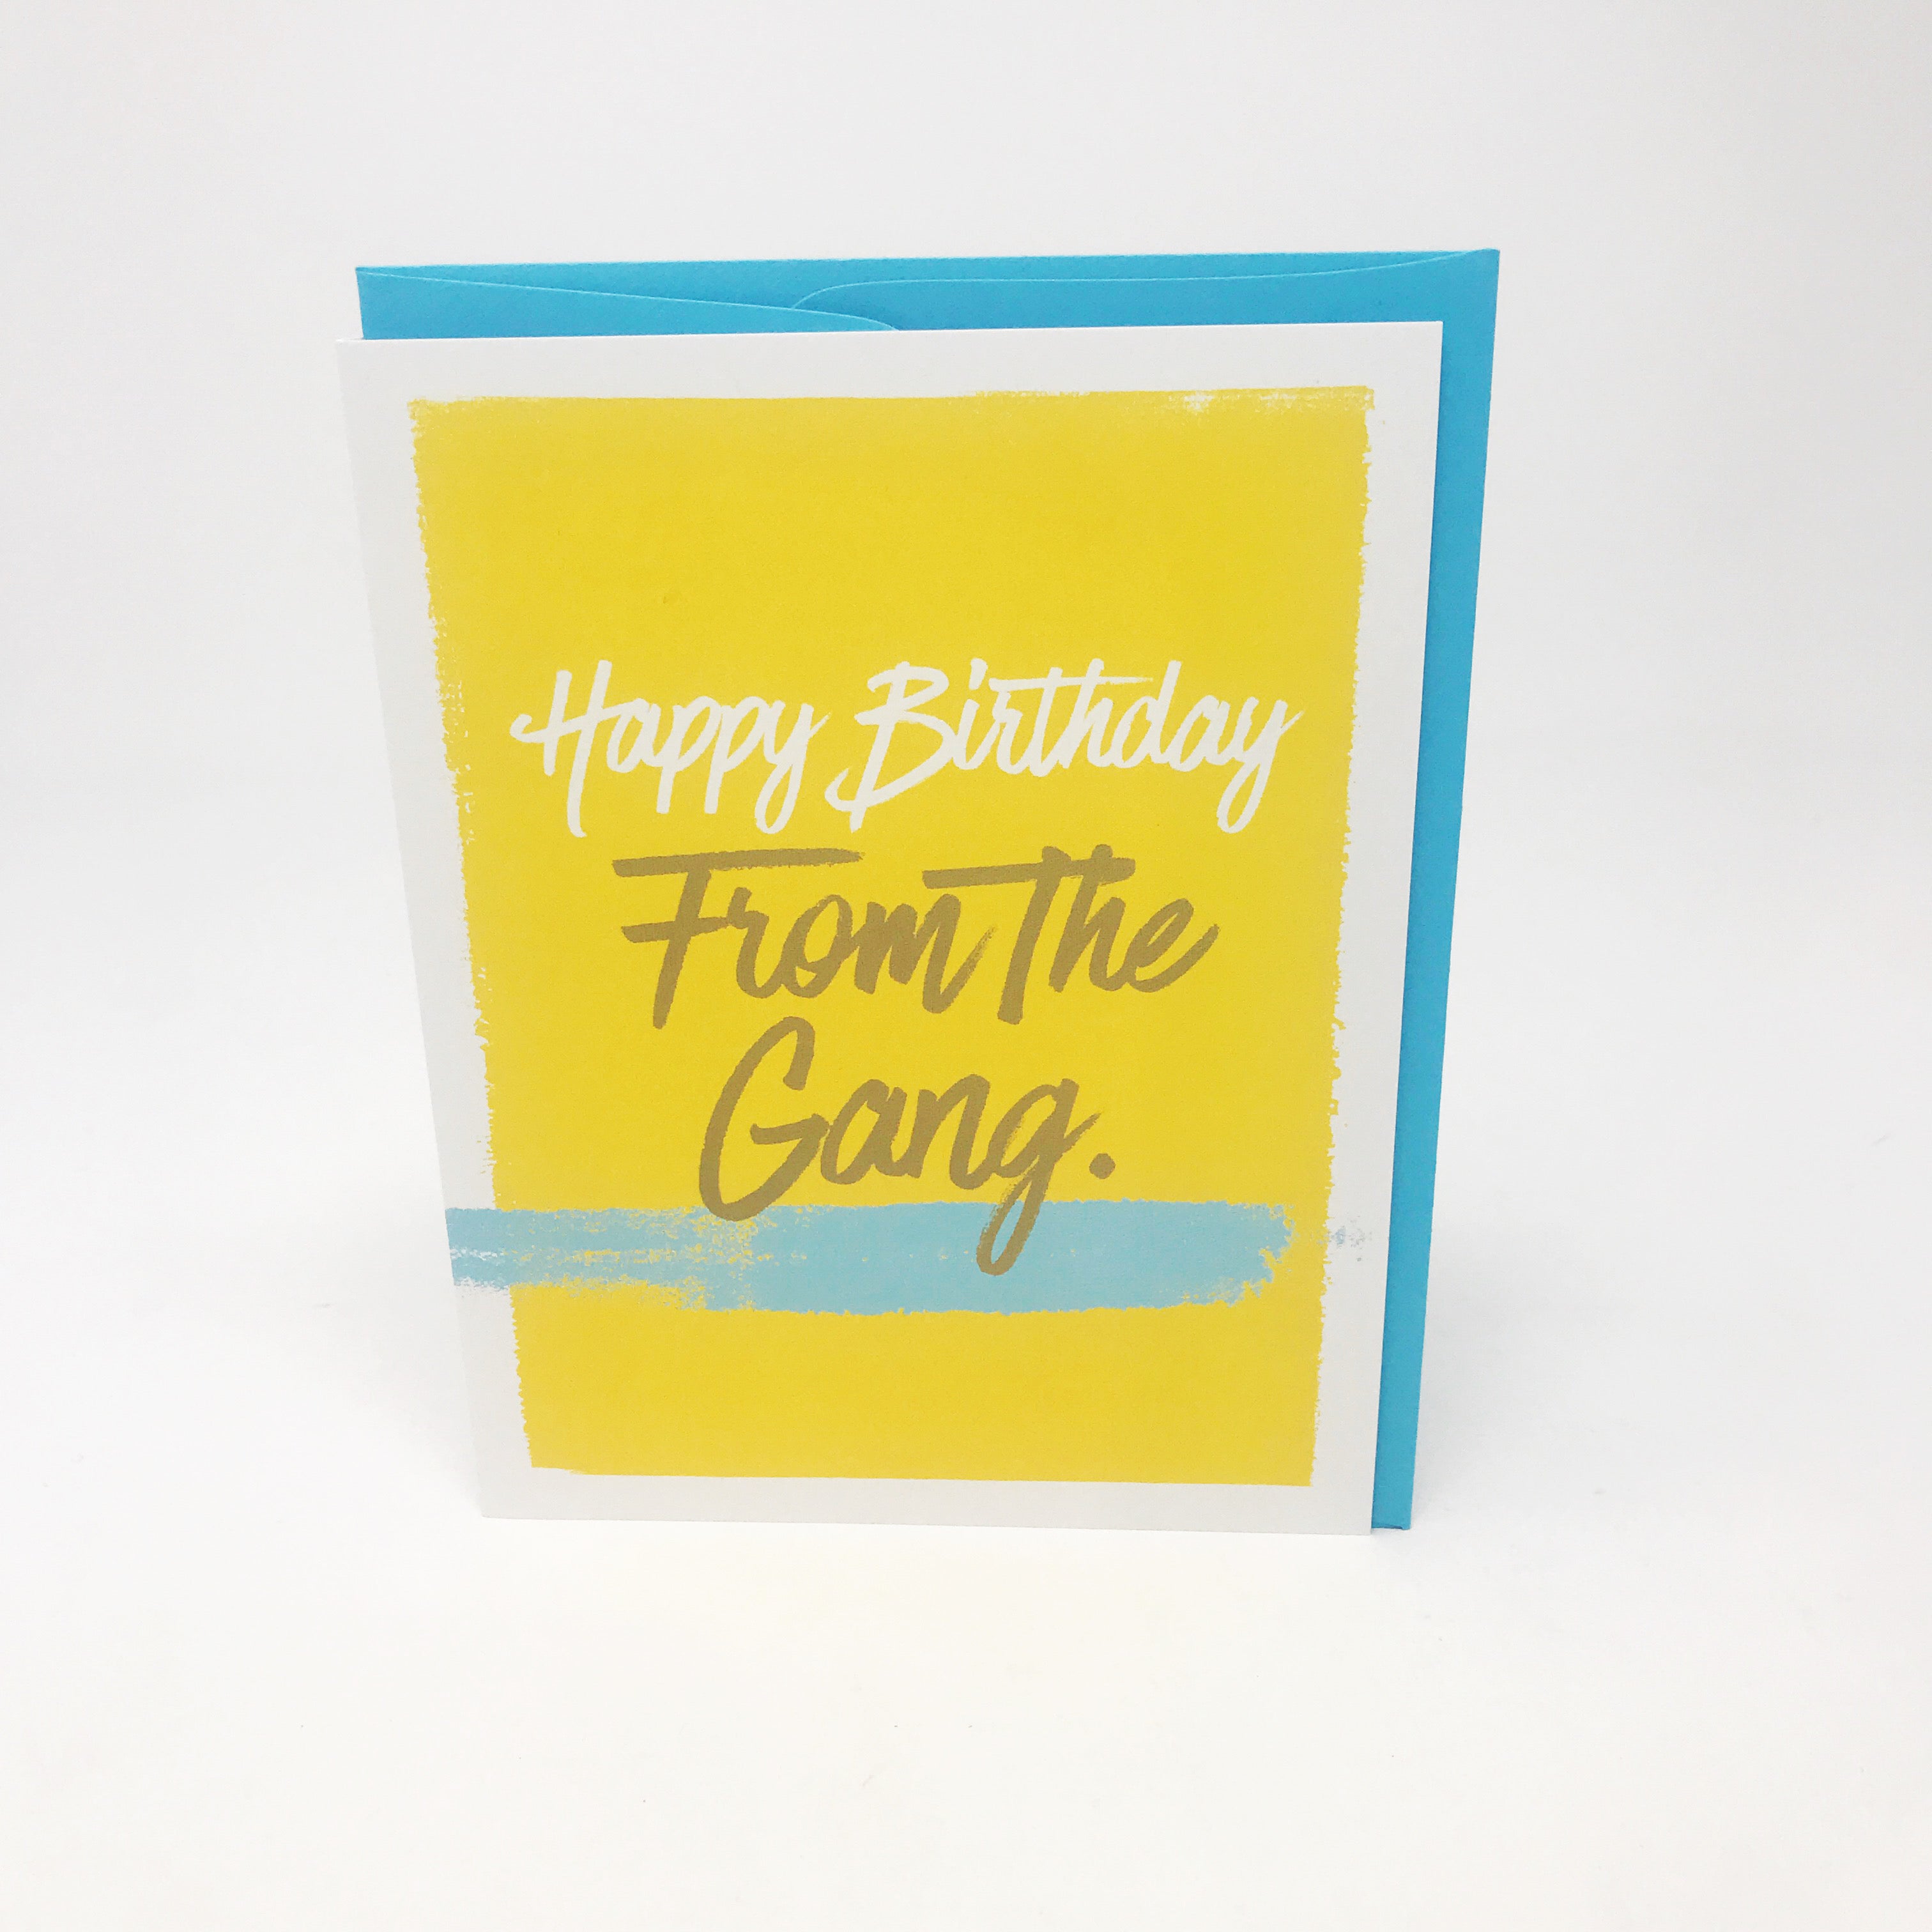 Happy Birthday Card from the gang